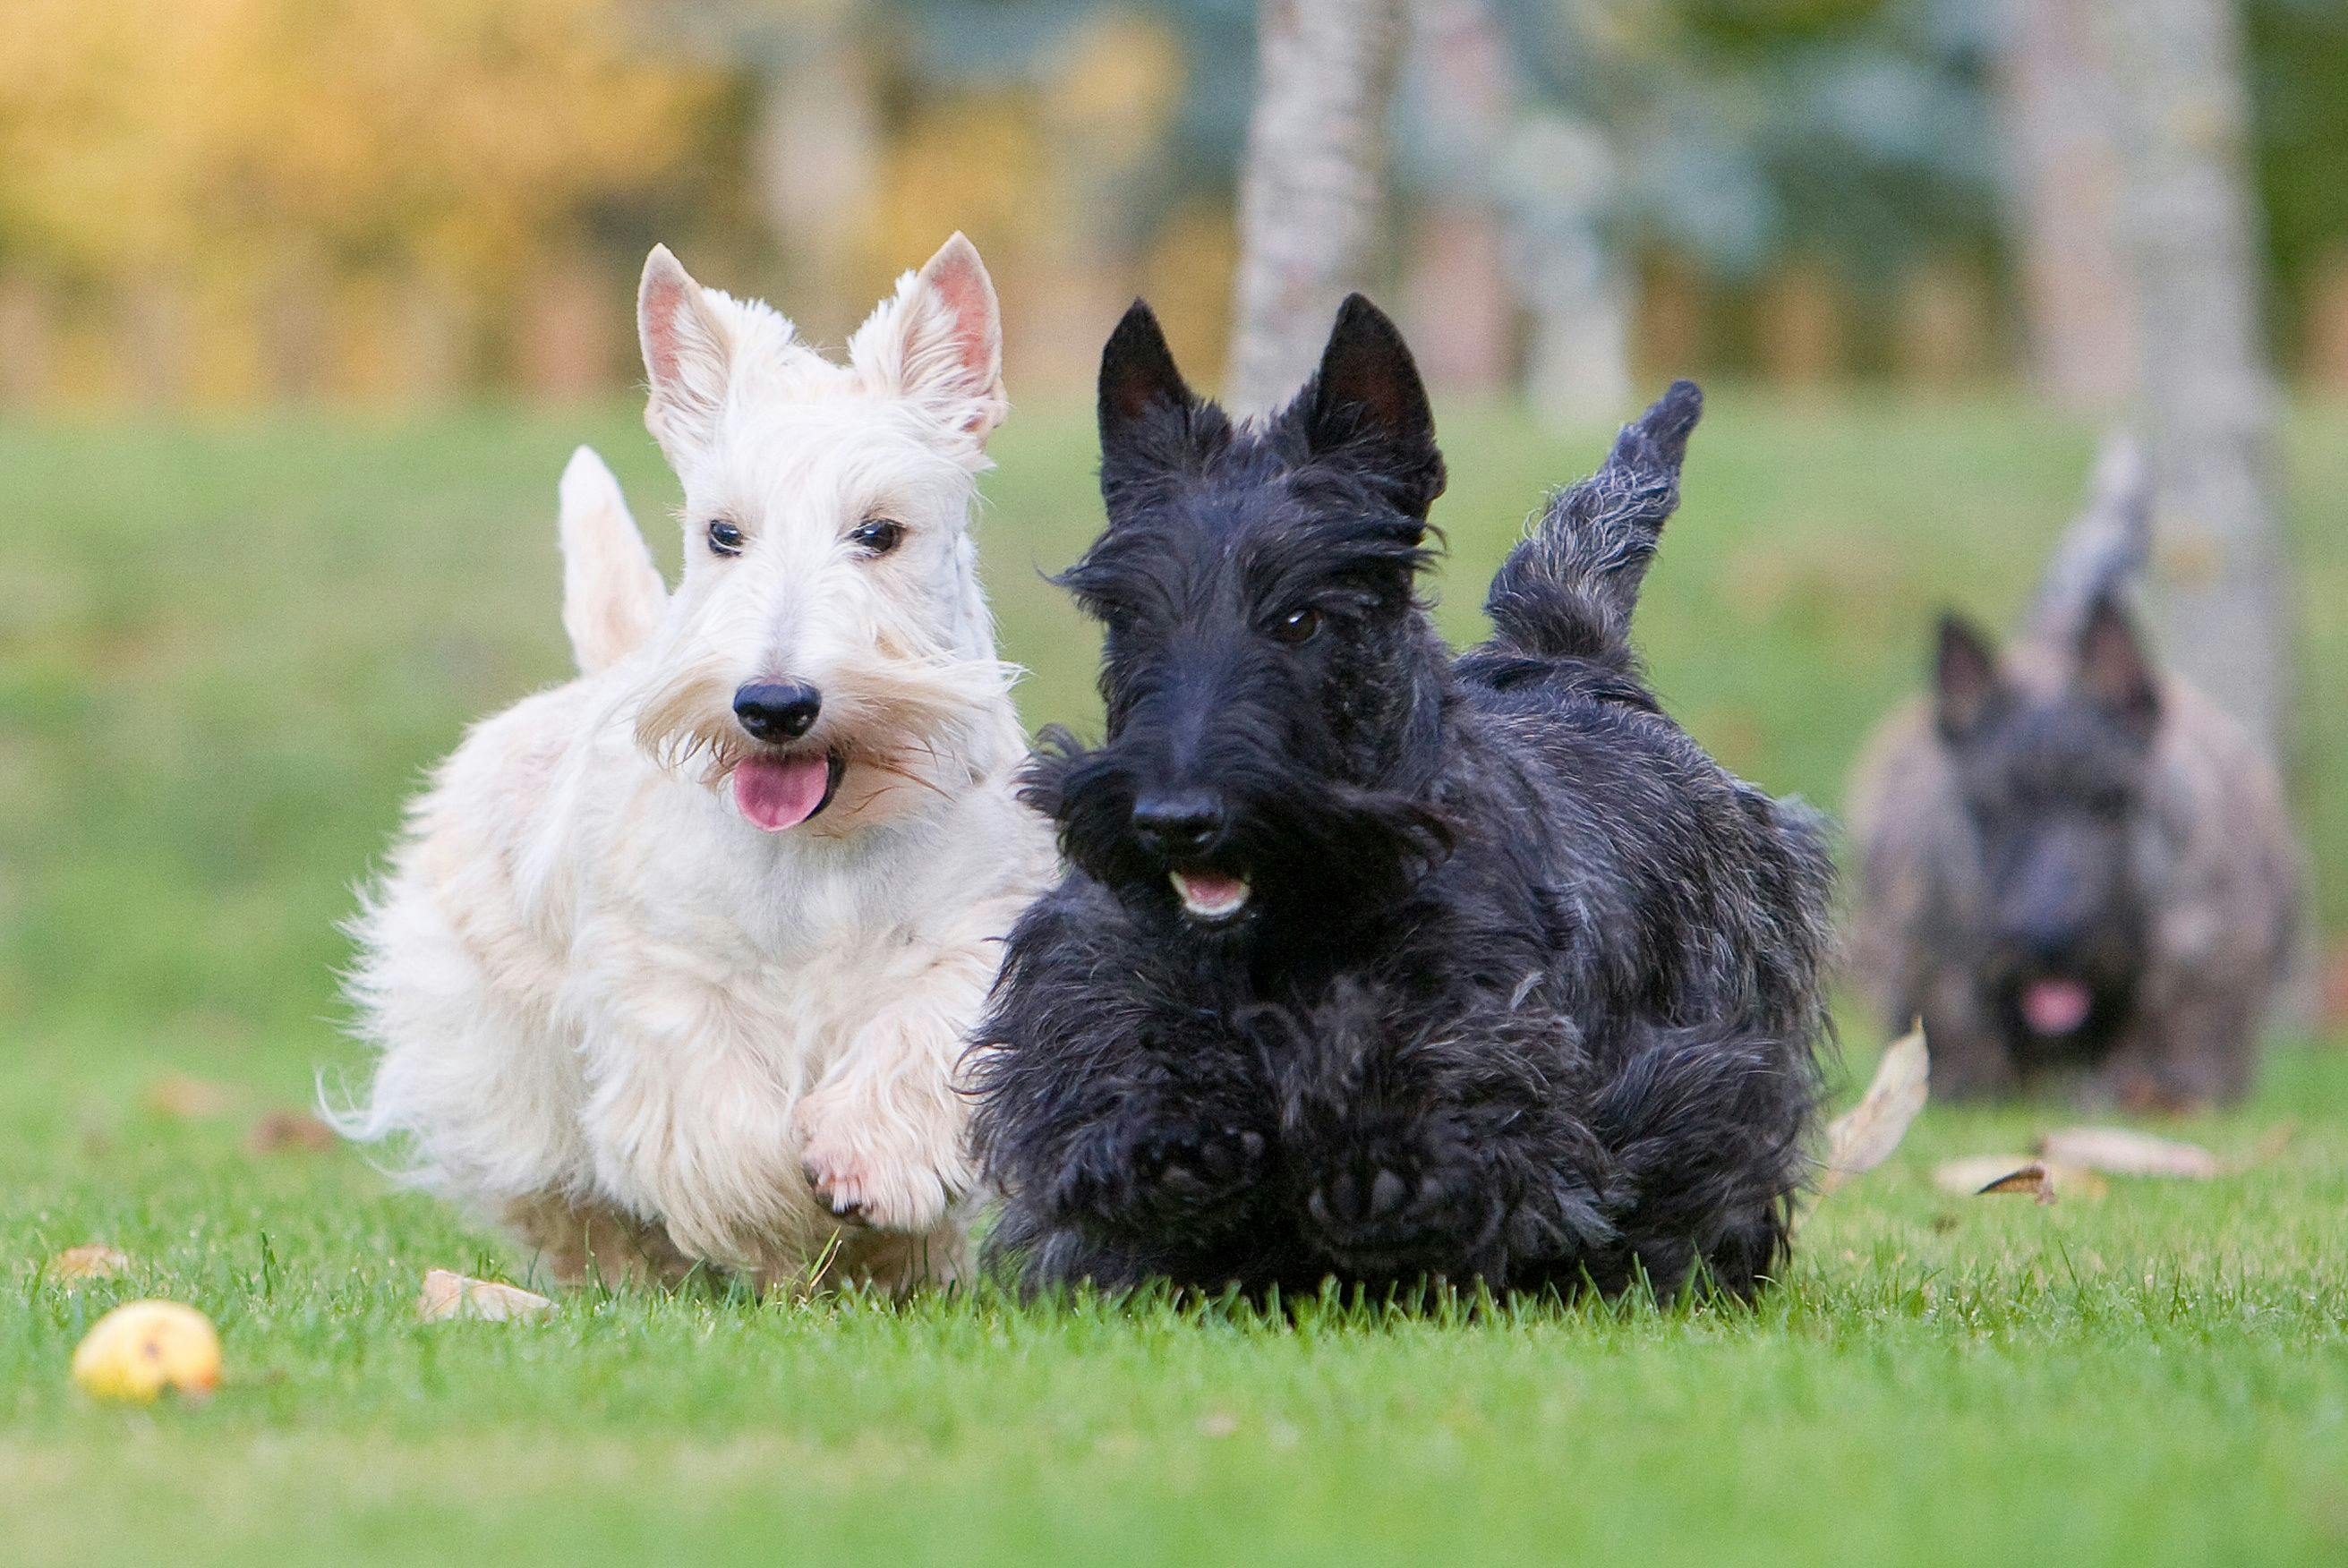 Study finds cigarette exposure to Scottish terriers can increase risk of bladder cancer 